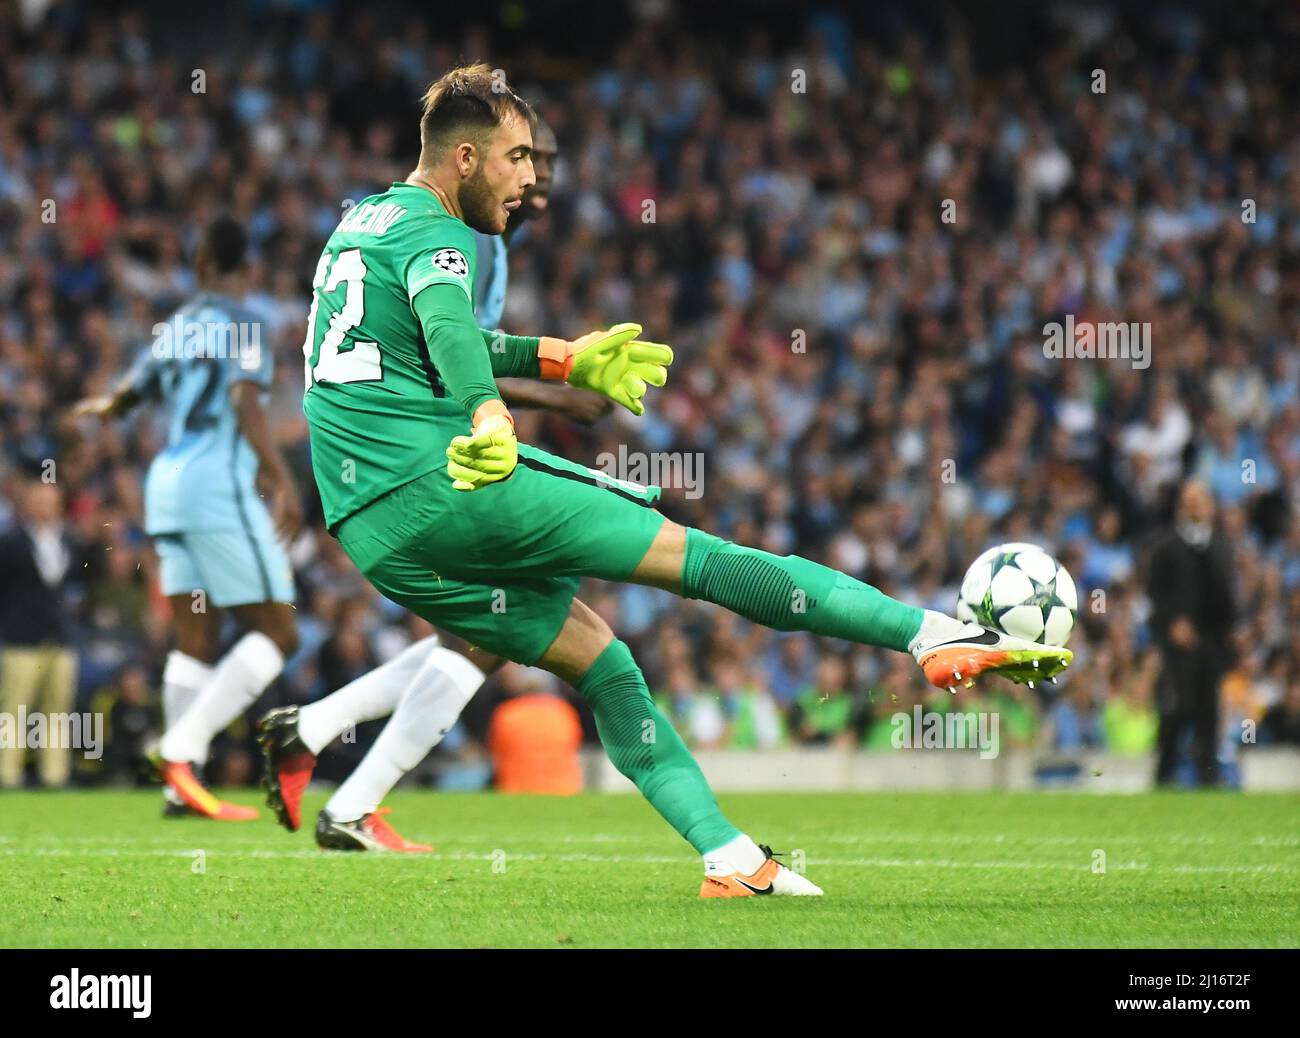 MANCHESTER, ENGLAND - AUGUST 24, 2016: Valentin Cojocaru of FCSB pictured during the second leg of the 2016/17 UEFA Champions League tie between Manchester City (Engalnd) and FCSB (Romania) at Etihad Stadium. Copyright: Cosmin Iftode/Picstaff Stock Photo